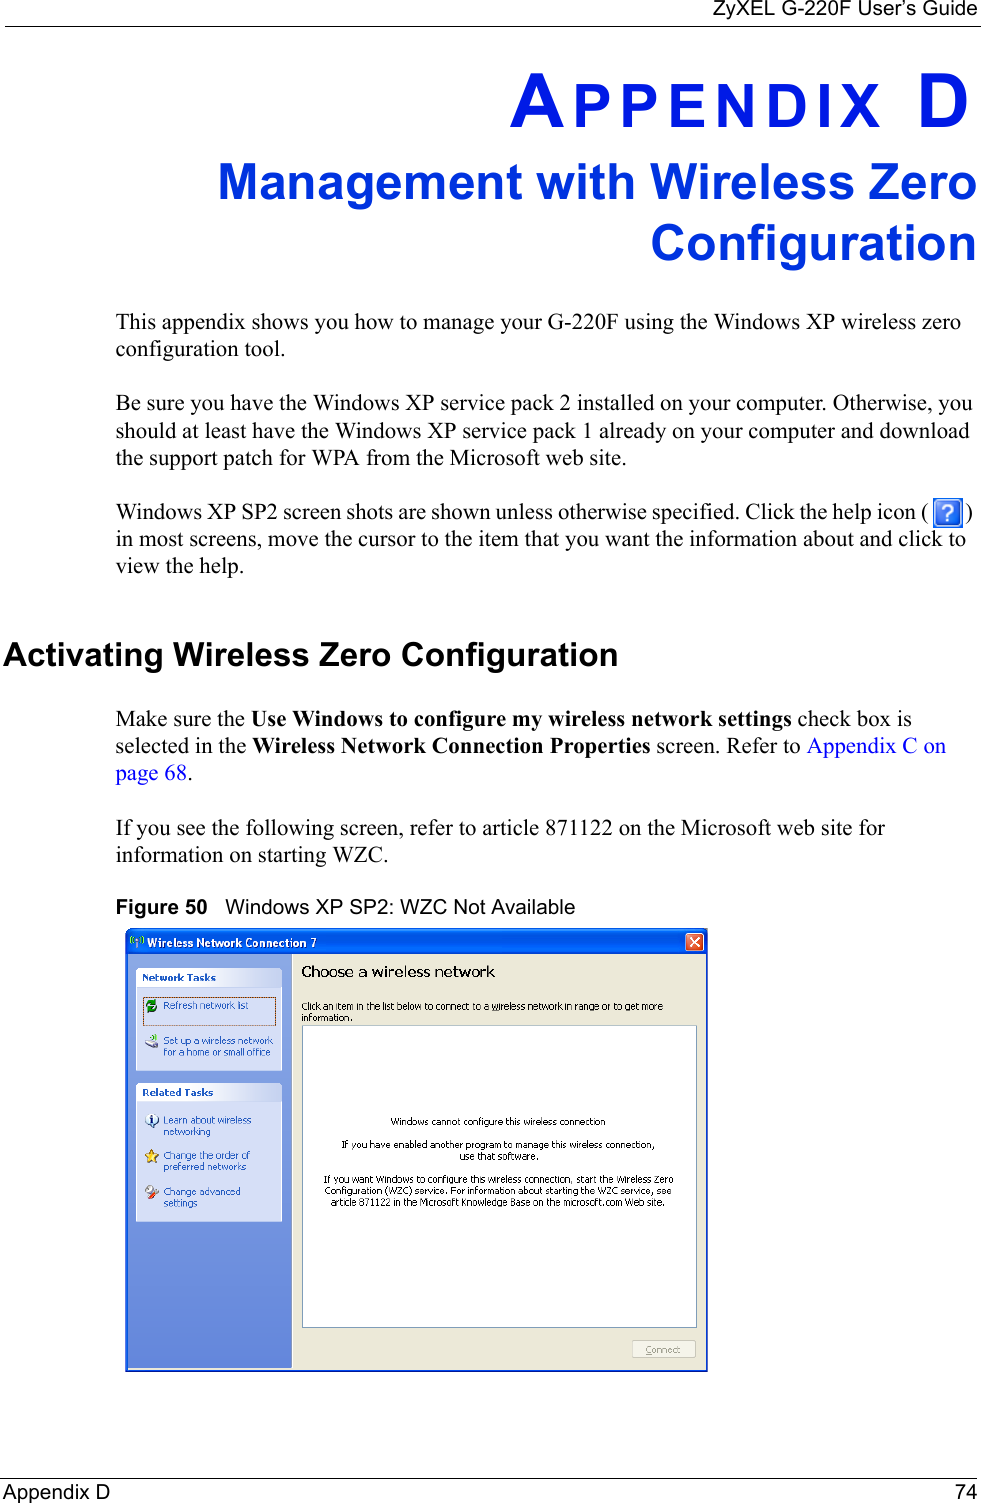 ZyXEL G-220F User’s GuideAppendix D  74APPENDIX DManagement with Wireless Zero ConfigurationThis appendix shows you how to manage your G-220F using the Windows XP wireless zero configuration tool.Be sure you have the Windows XP service pack 2 installed on your computer. Otherwise, you should at least have the Windows XP service pack 1 already on your computer and download the support patch for WPA from the Microsoft web site.Windows XP SP2 screen shots are shown unless otherwise specified. Click the help icon ( ) in most screens, move the cursor to the item that you want the information about and click to view the help.Activating Wireless Zero ConfigurationMake sure the Use Windows to configure my wireless network settings check box is selected in the Wireless Network Connection Properties screen. Refer to Appendix C on page 68.If you see the following screen, refer to article 871122 on the Microsoft web site for information on starting WZC.Figure 50   Windows XP SP2: WZC Not Available